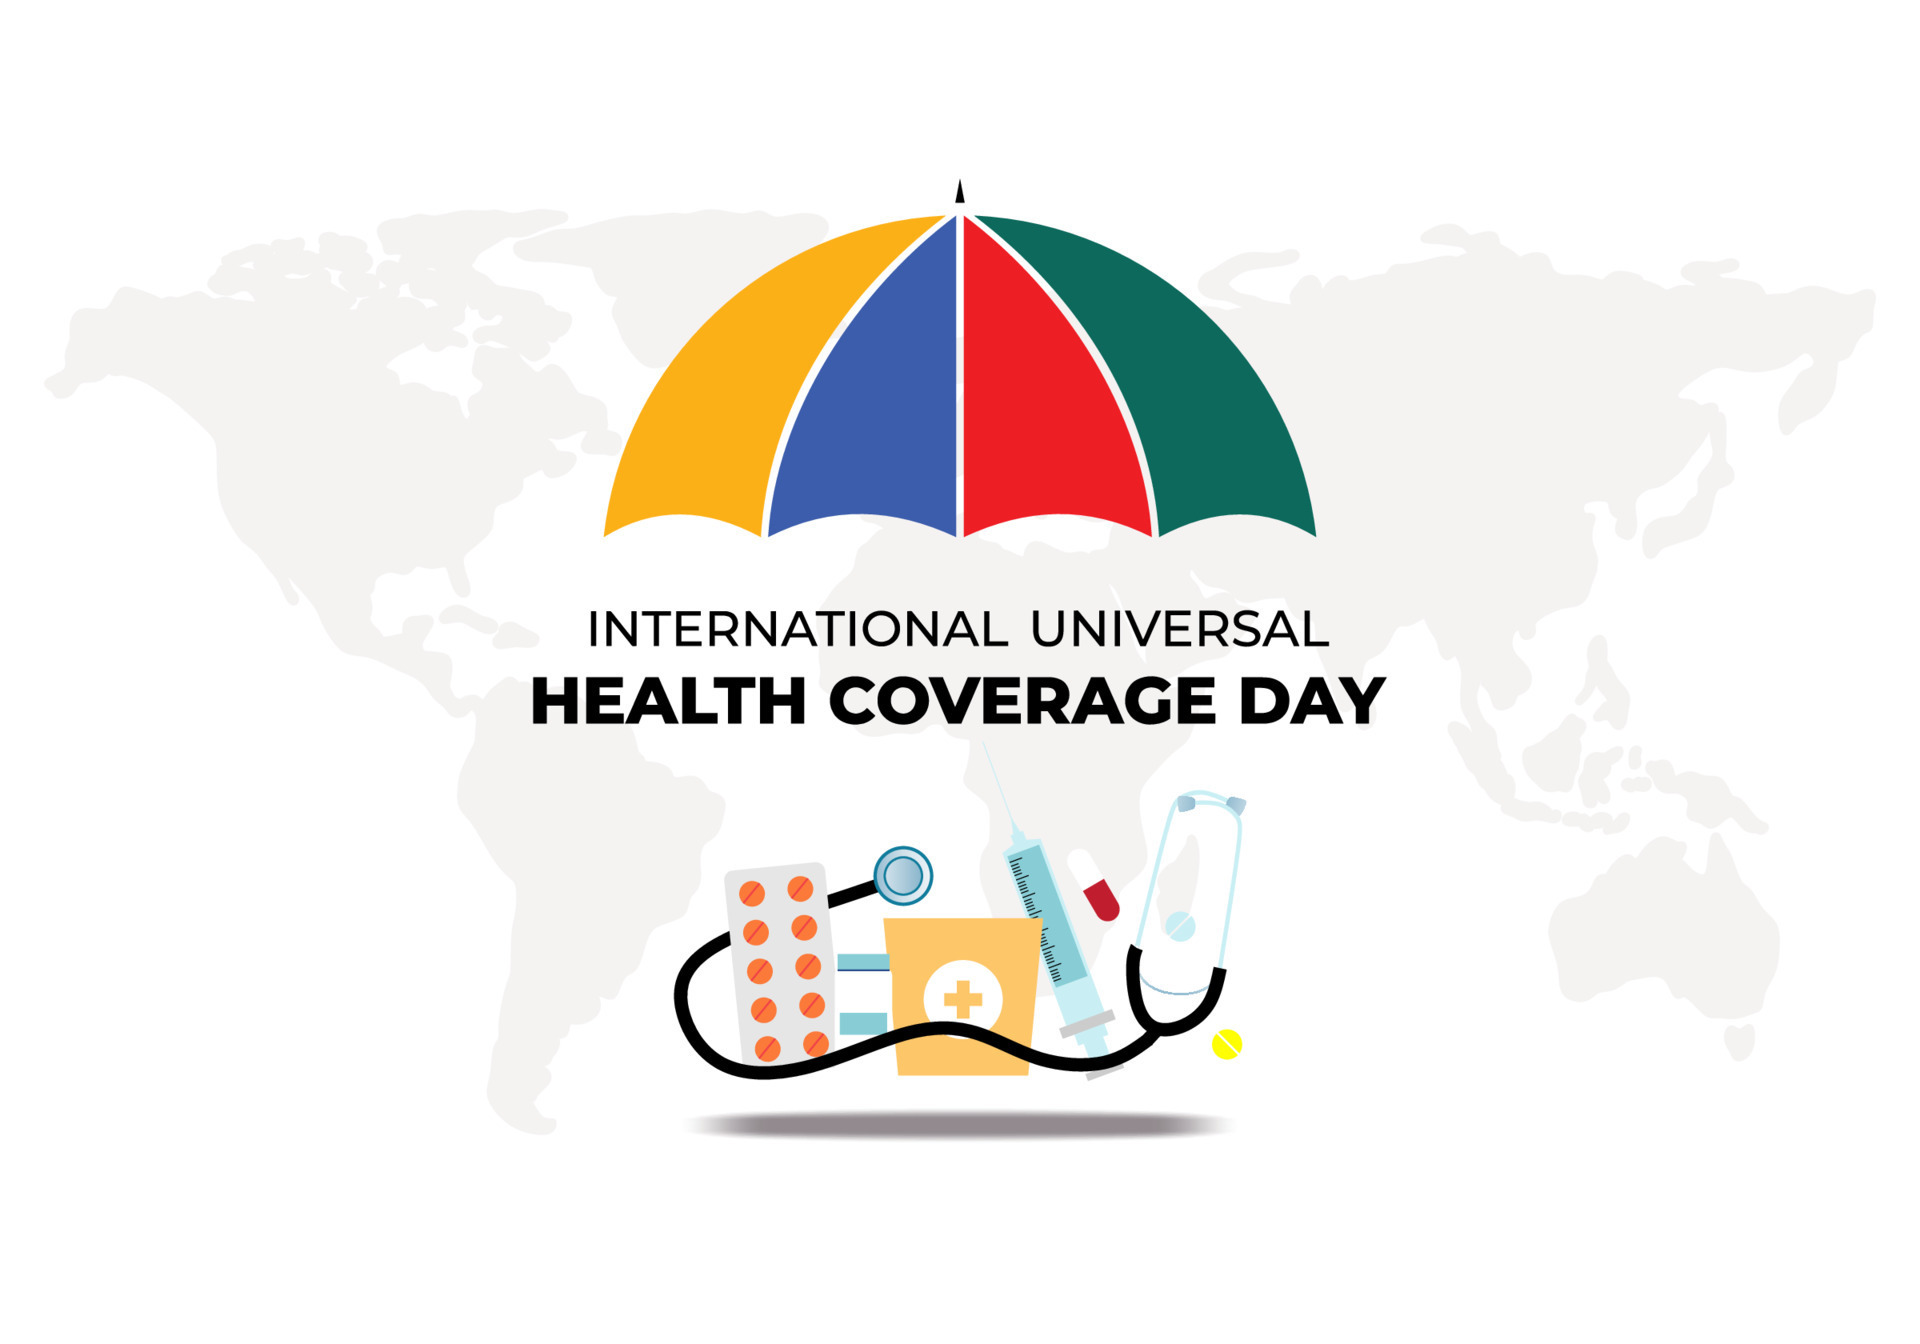 Int’l Universal Health Coverage Day being marked today